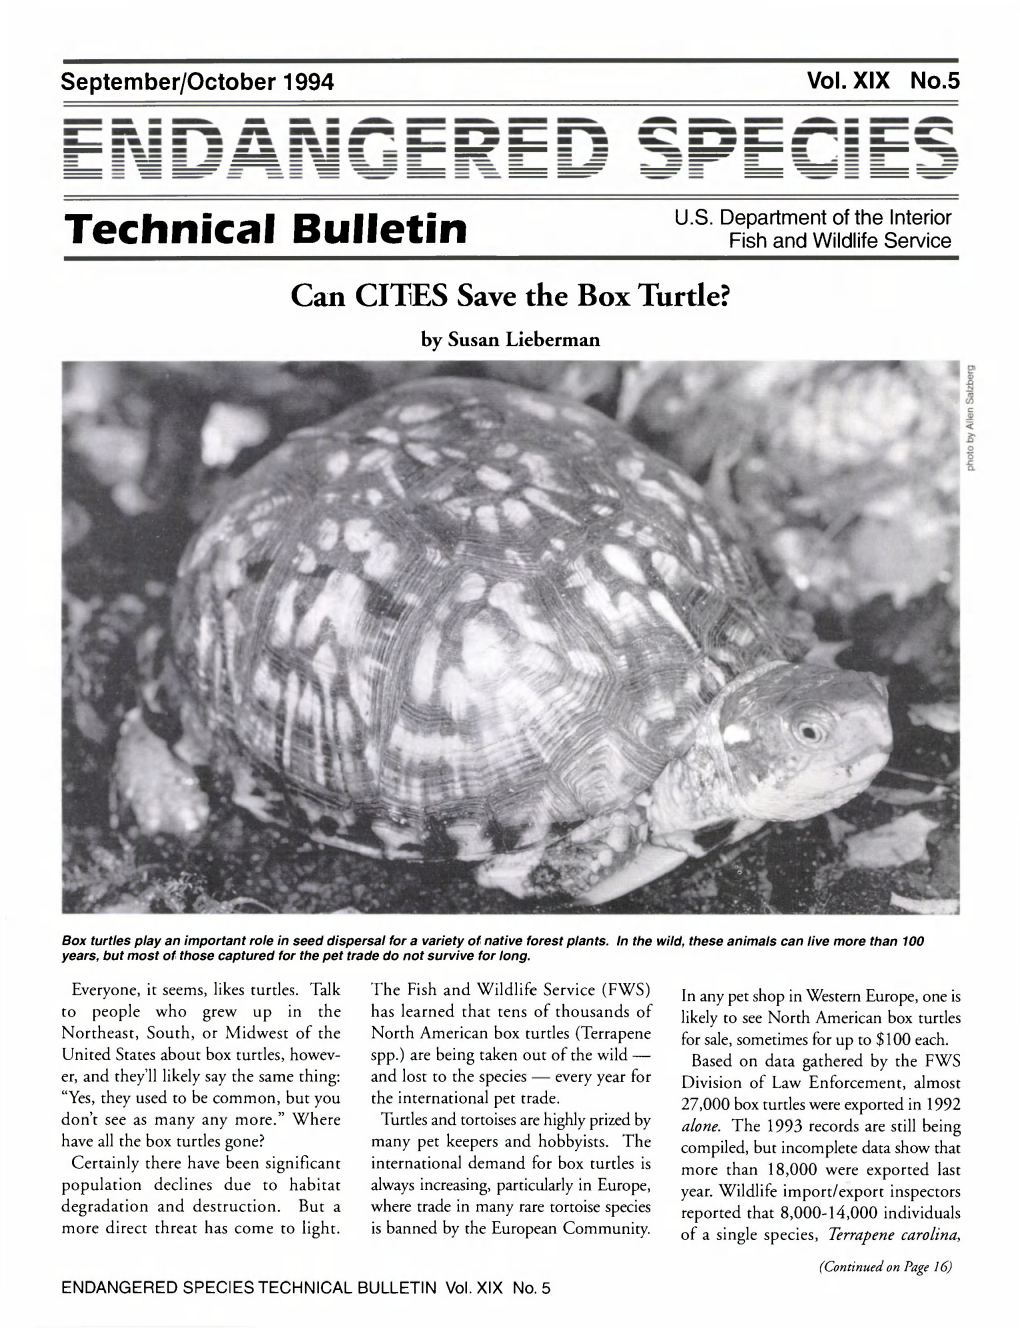 Technical Bulletin Fish and Wildlife Service Can CITES Save the Box Turtle?